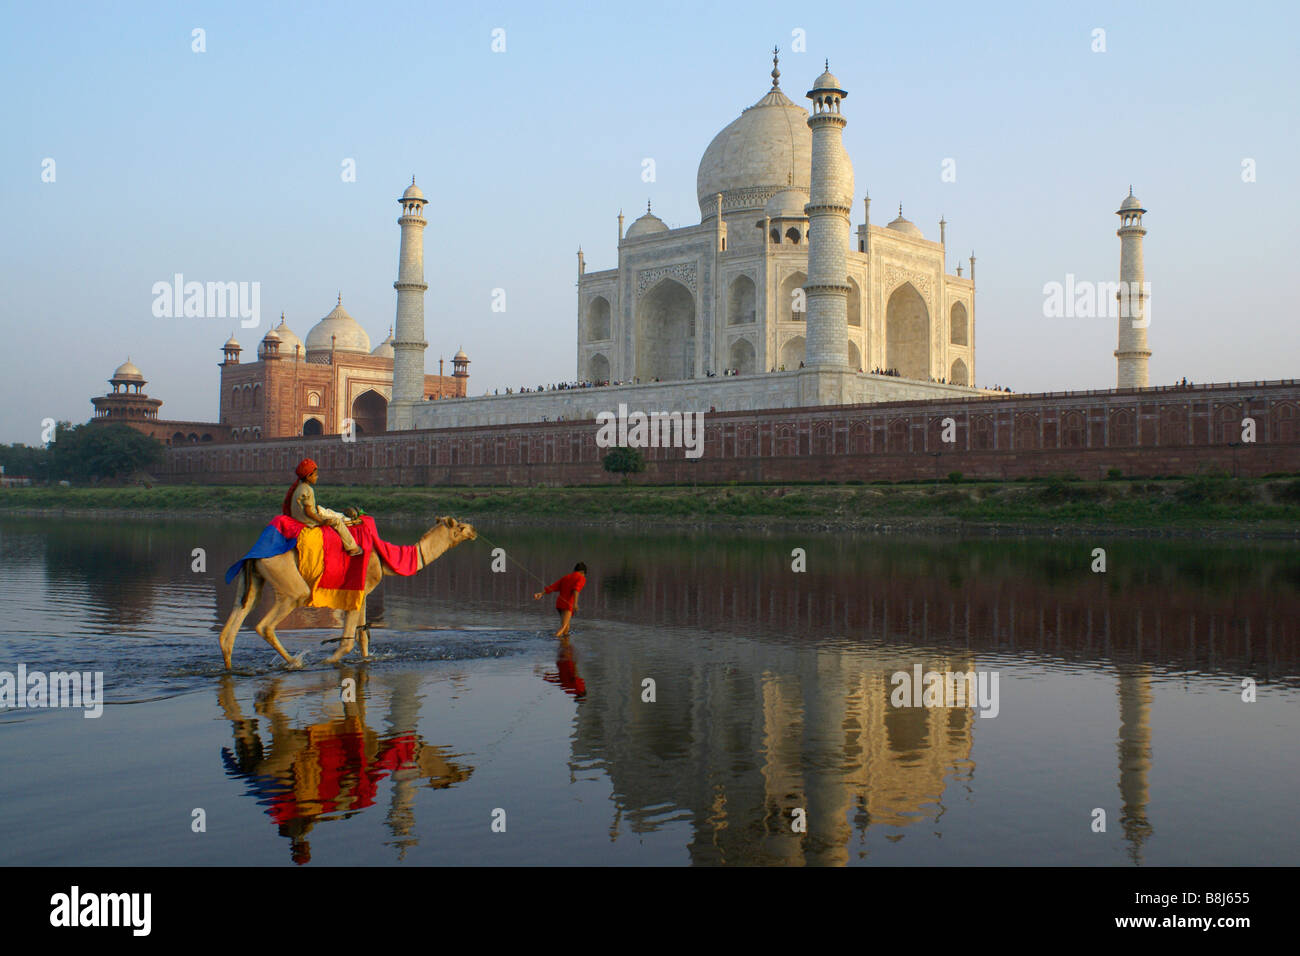 Camel crossing Yamuna River with Taj Mahal in background, Agra, India Stock Photo